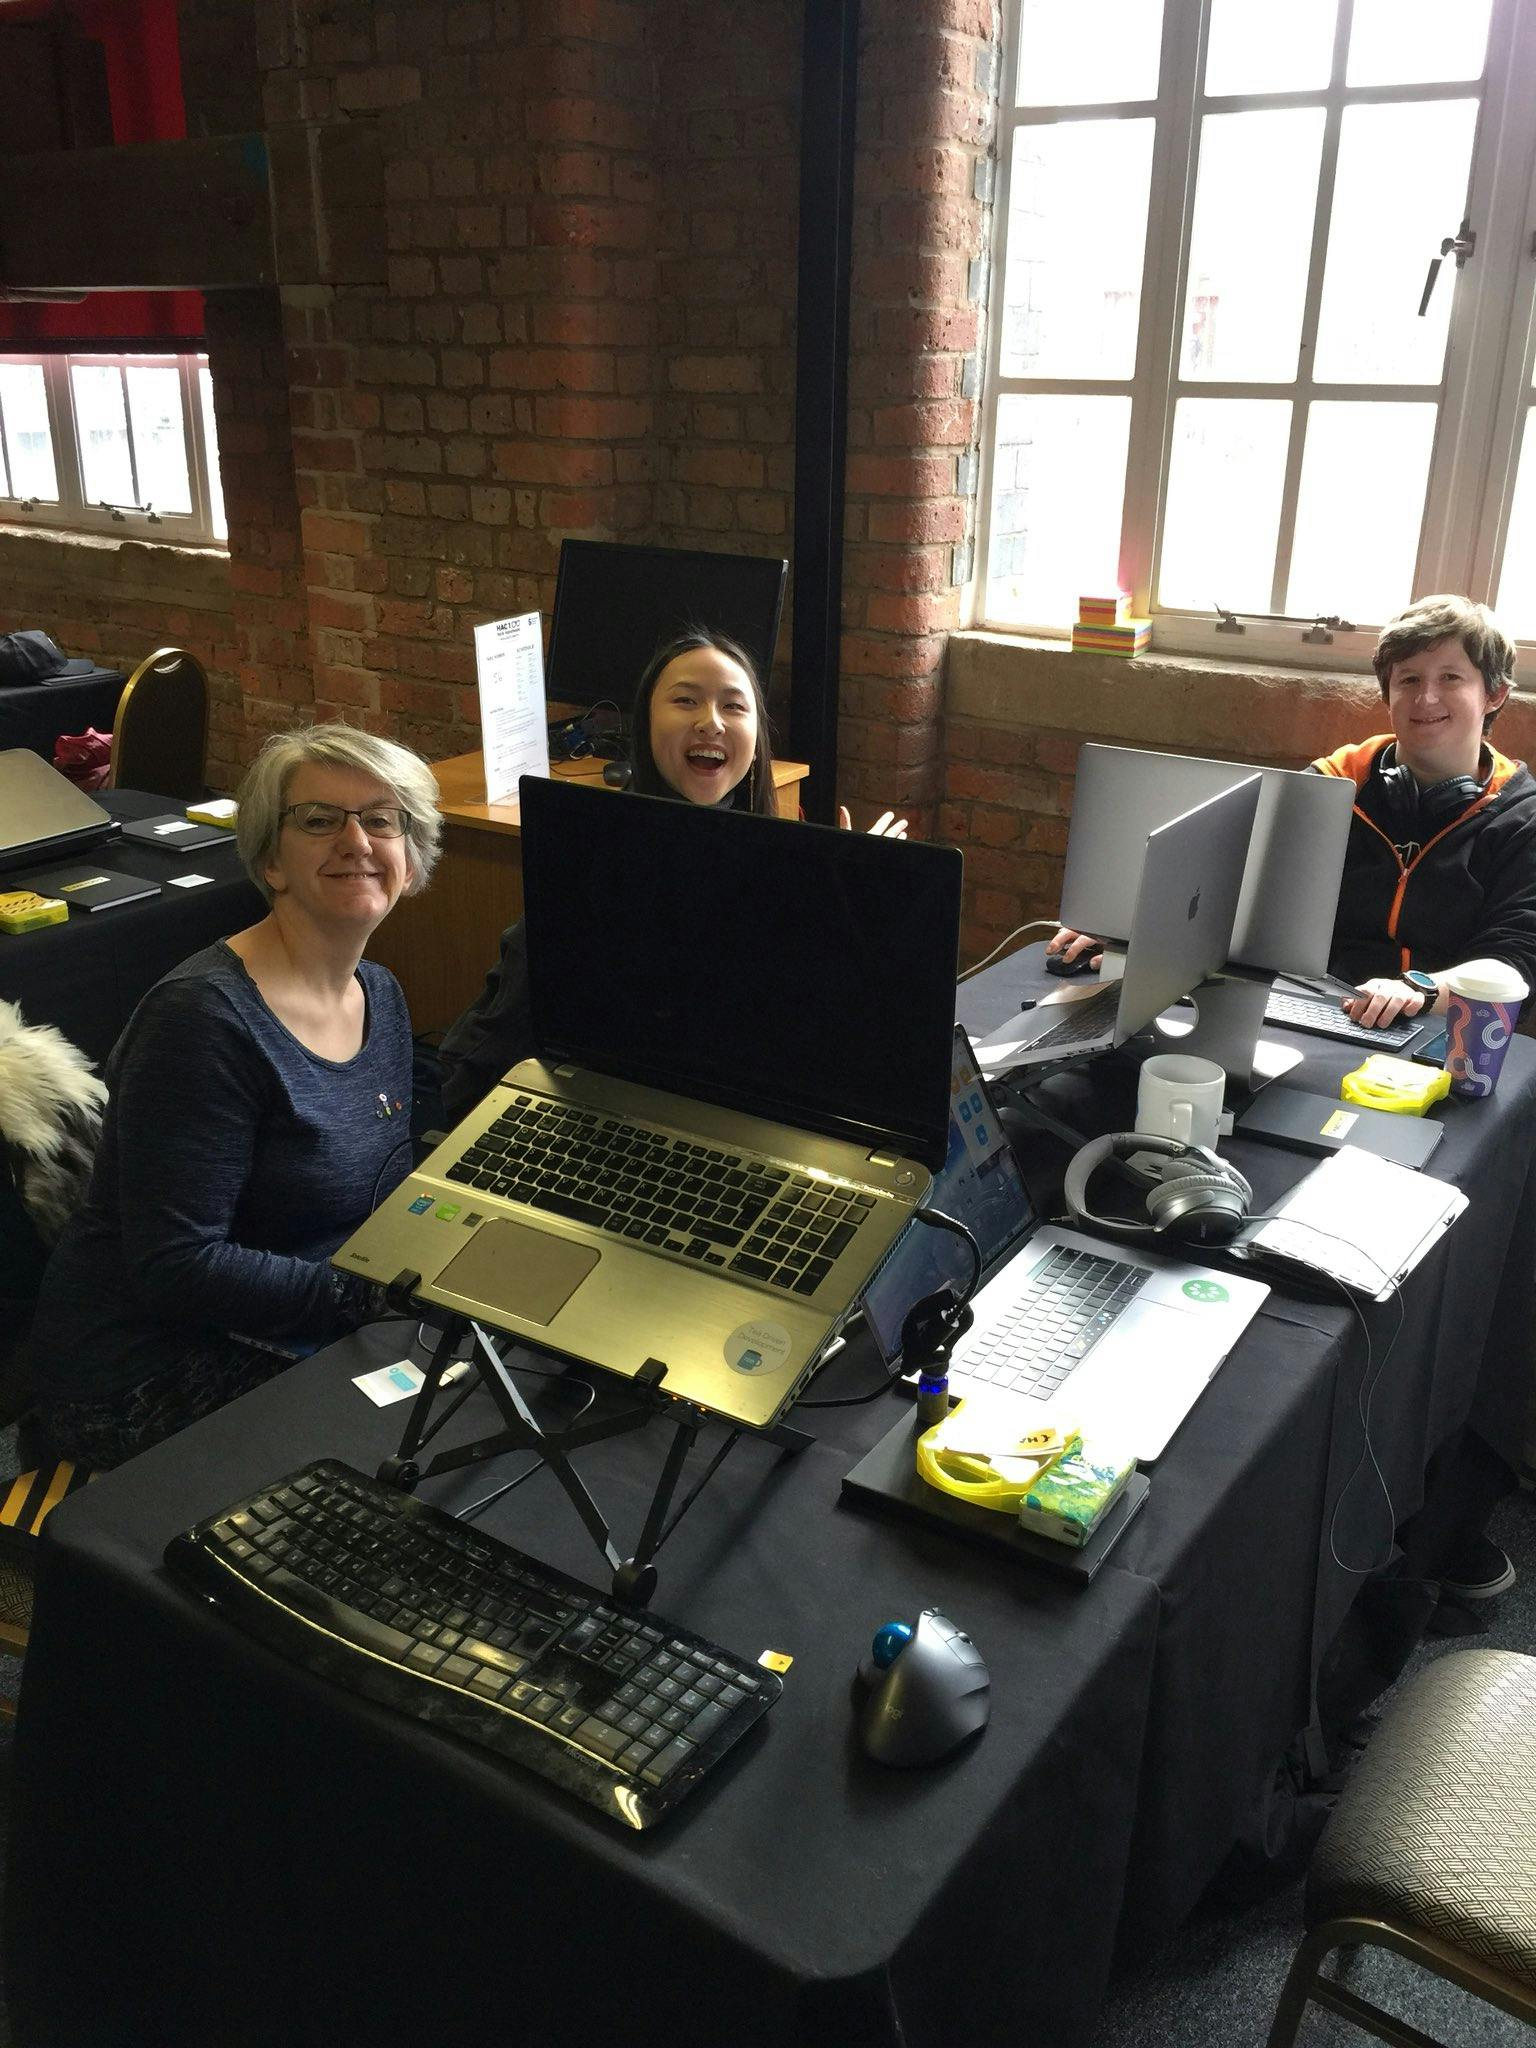 Our team at Hack Manchester 2018 ready to get started